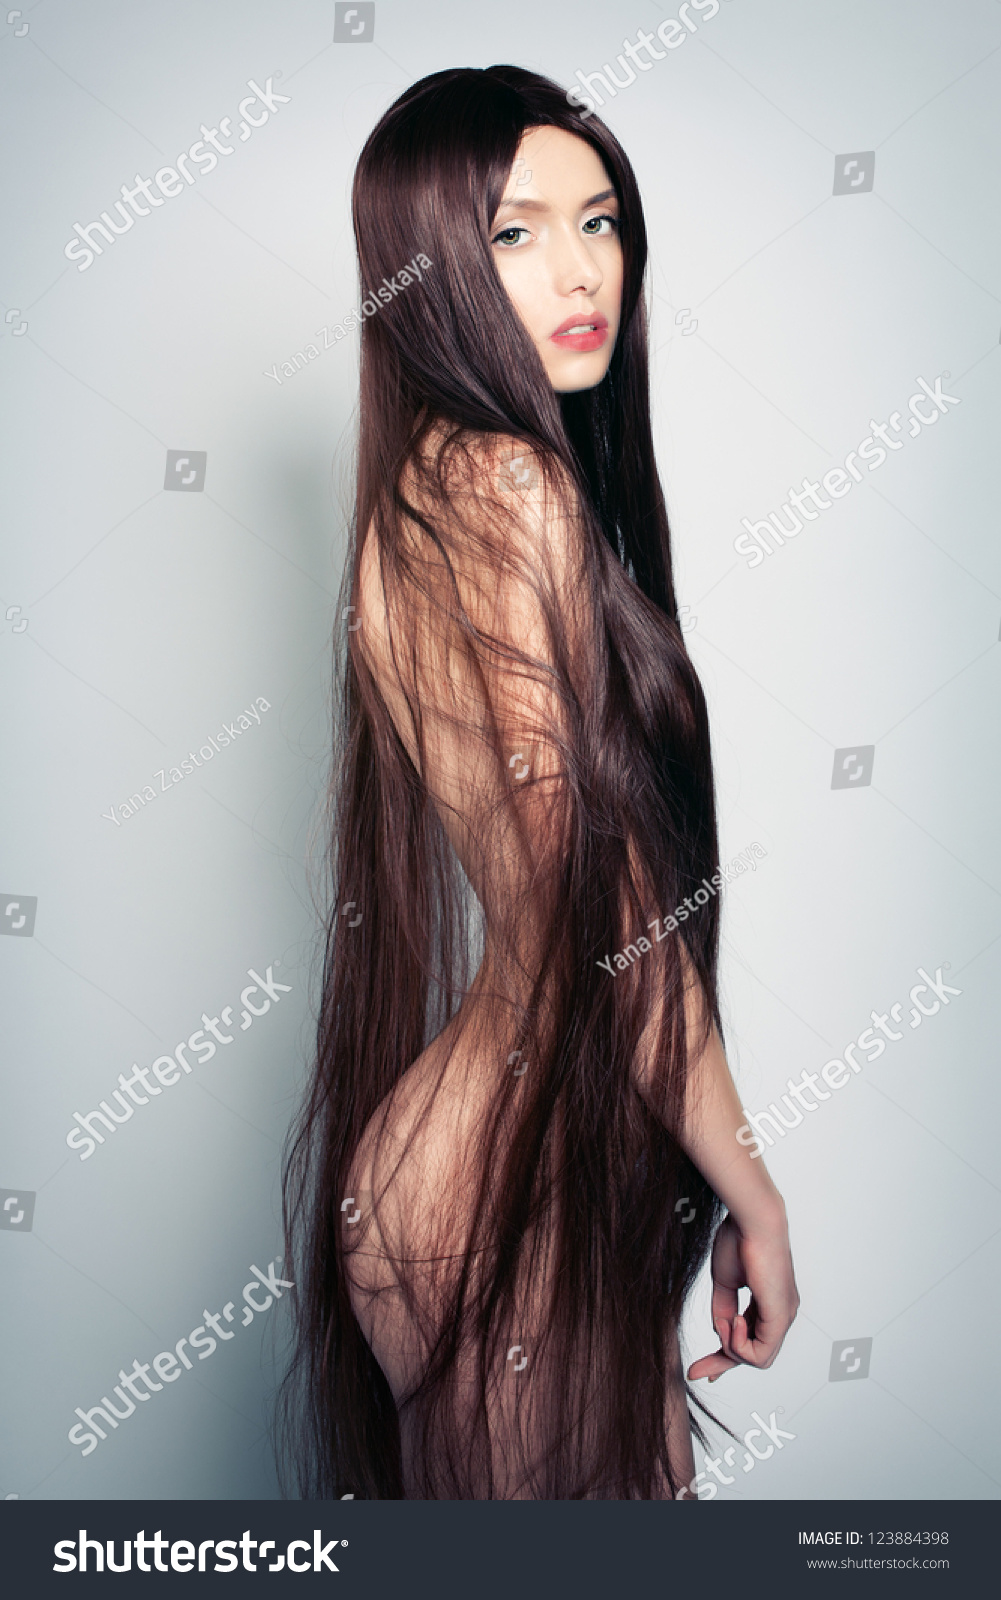 Portrait Naked Young Woman Long Hair pic